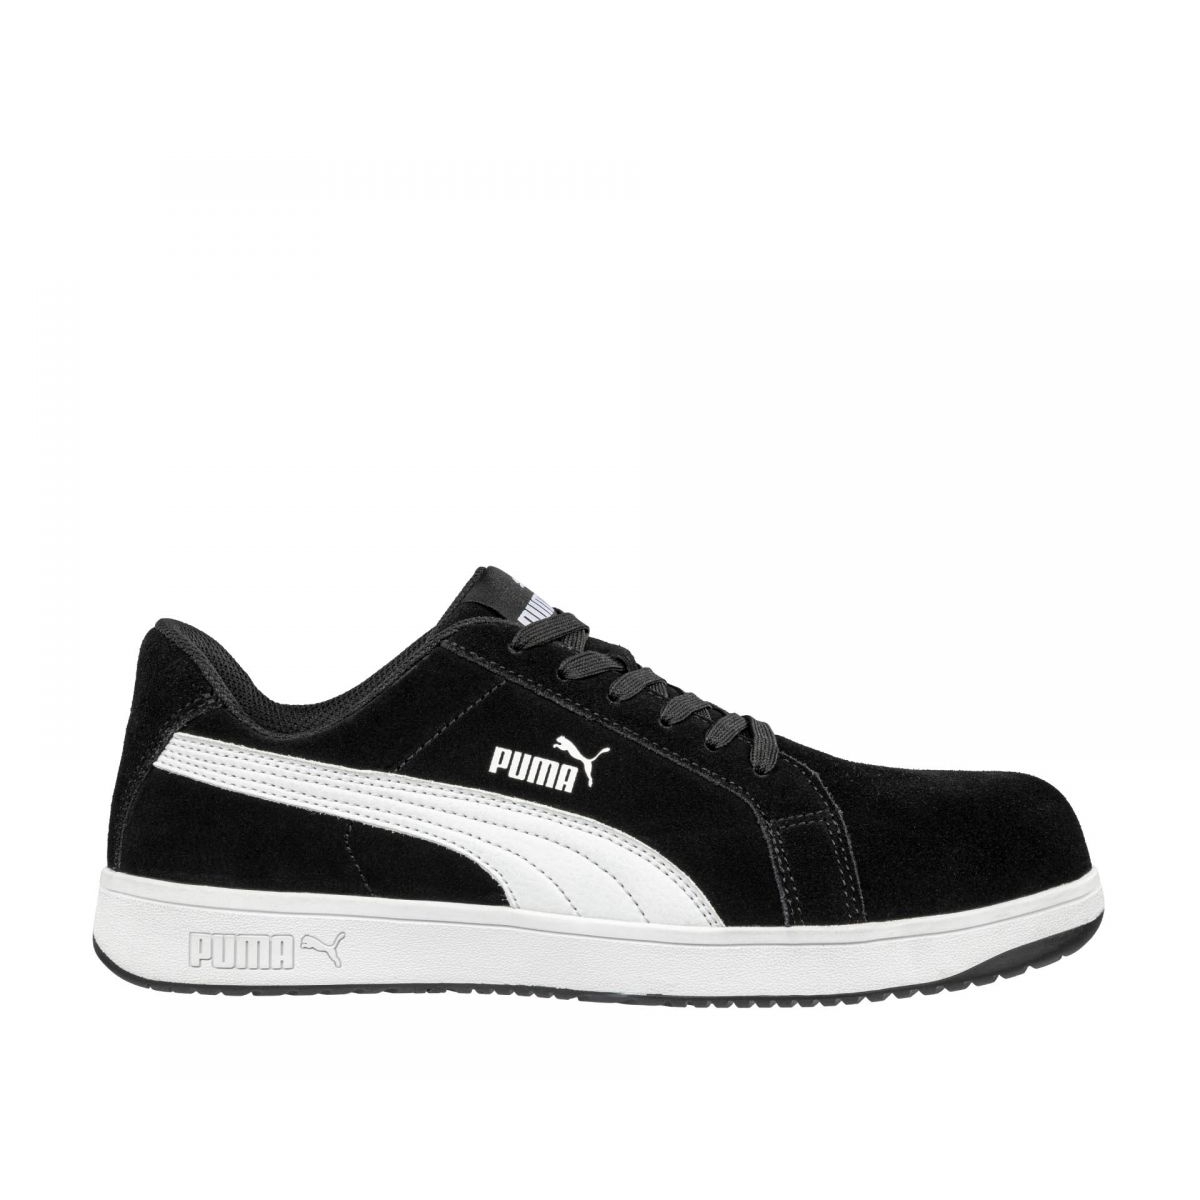 PUMA Safety Men's Iconic Low Composite Toe EH Work Shoes Black Suede - 640015 ONE SIZE BLACK - BLACK, 11